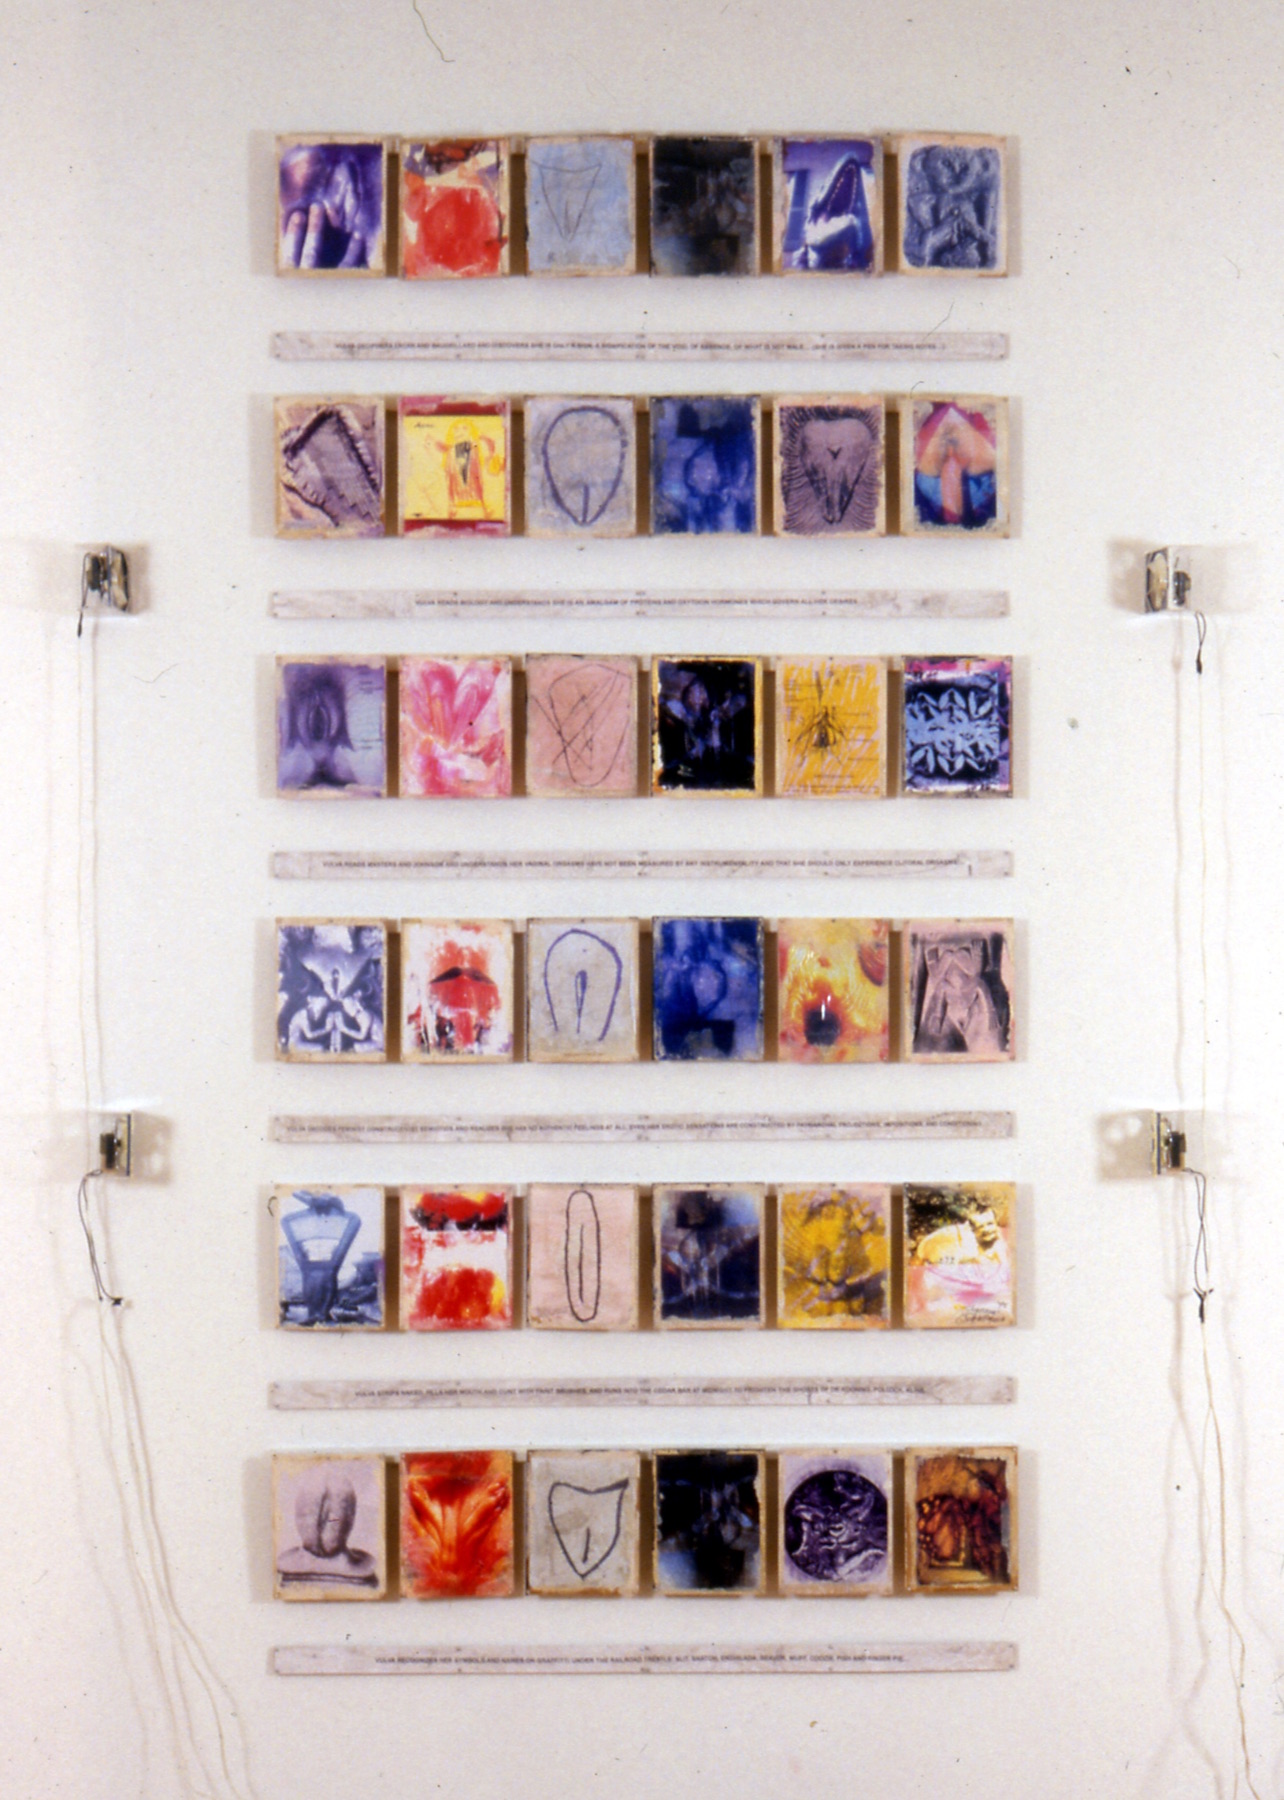 installation shot of the 36 panels displayed in a 6x6 grid; each is a different photo, drawing, or representation of a vulva in purple, yellow, red, and black.